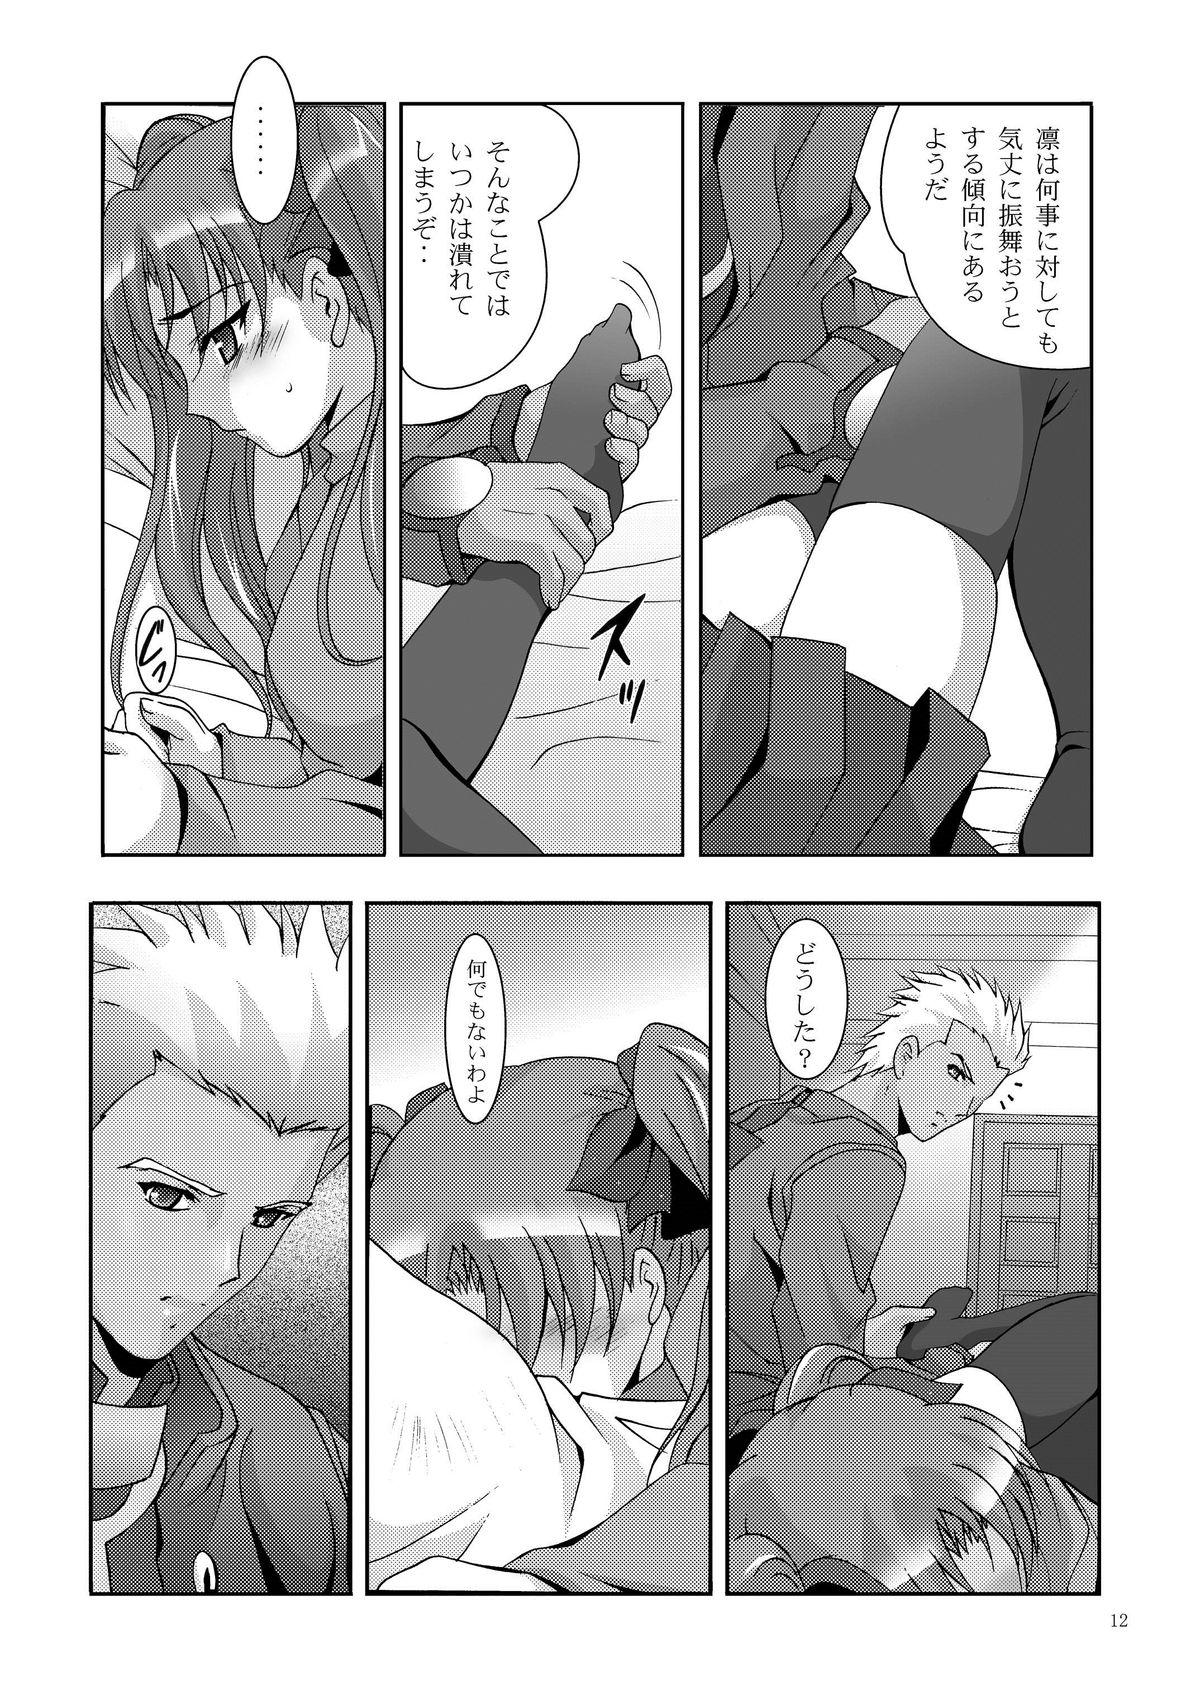 Tongue MOUSOU THEATER 19 - Fate stay night Art - Page 12